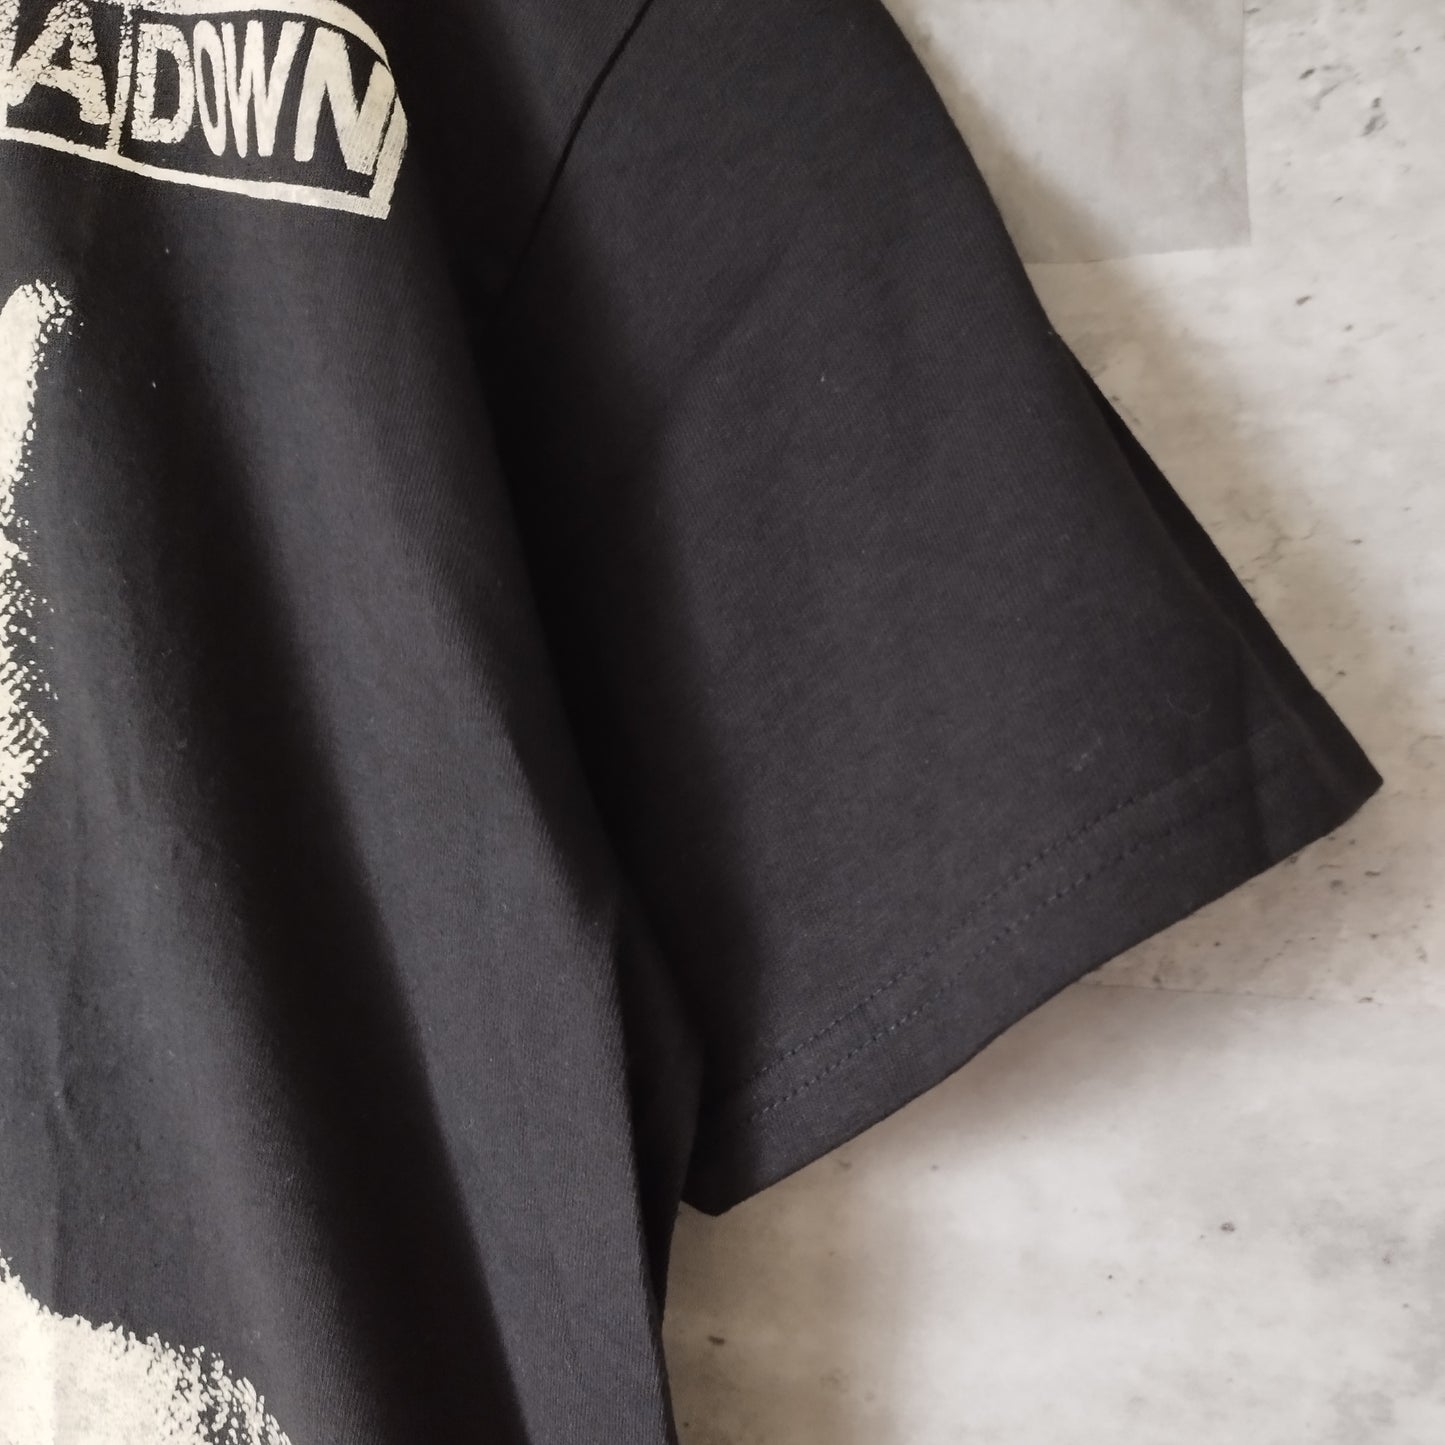 [SYSTEM OF A DOWN]  print t-shirt